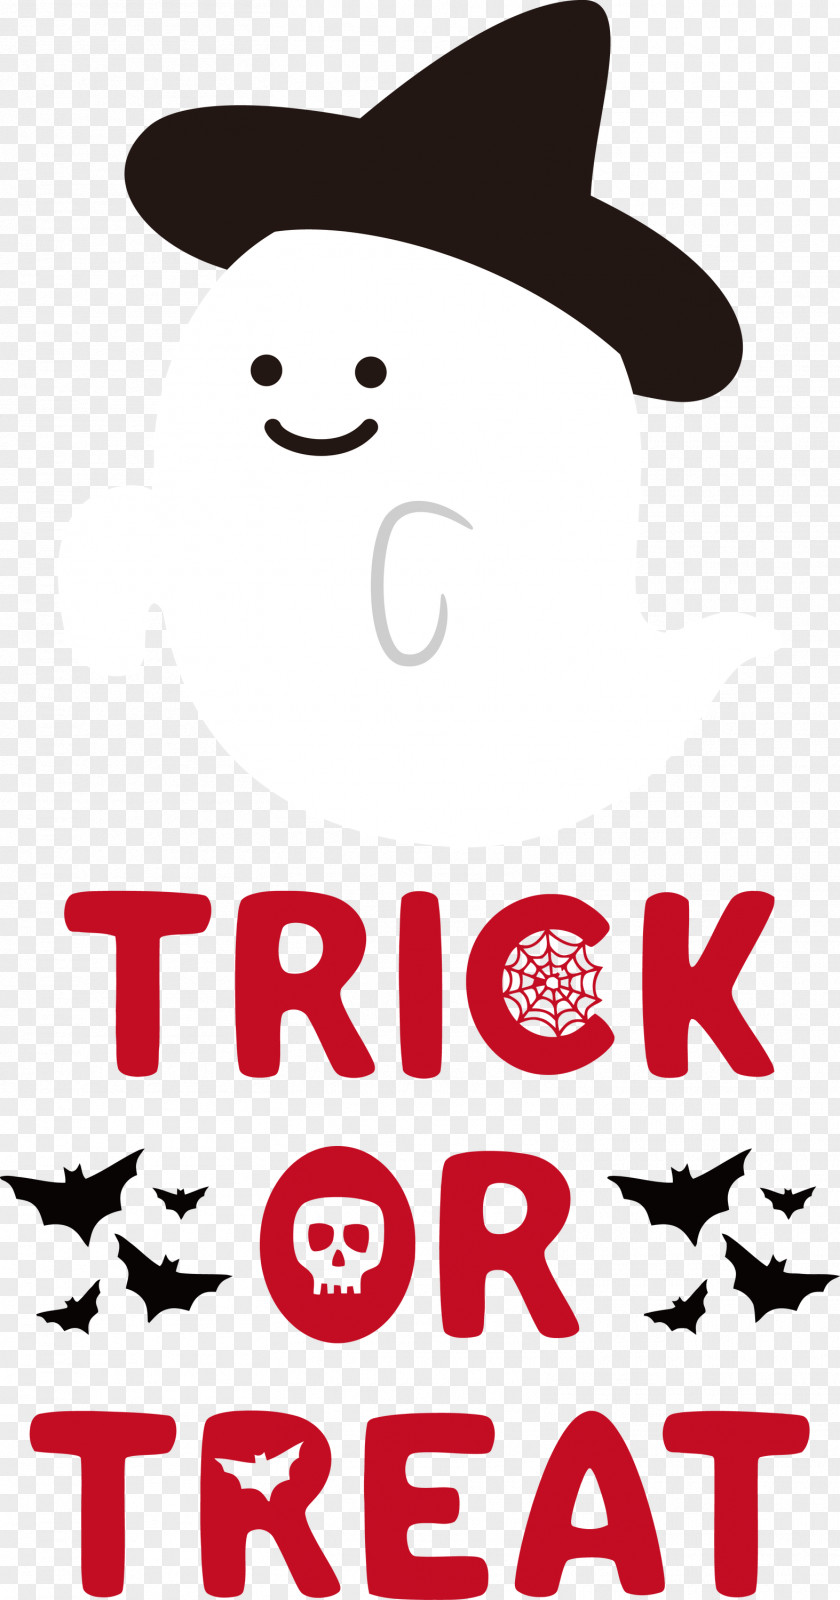 Trick Or Treat Halloween Trick-or-treating PNG